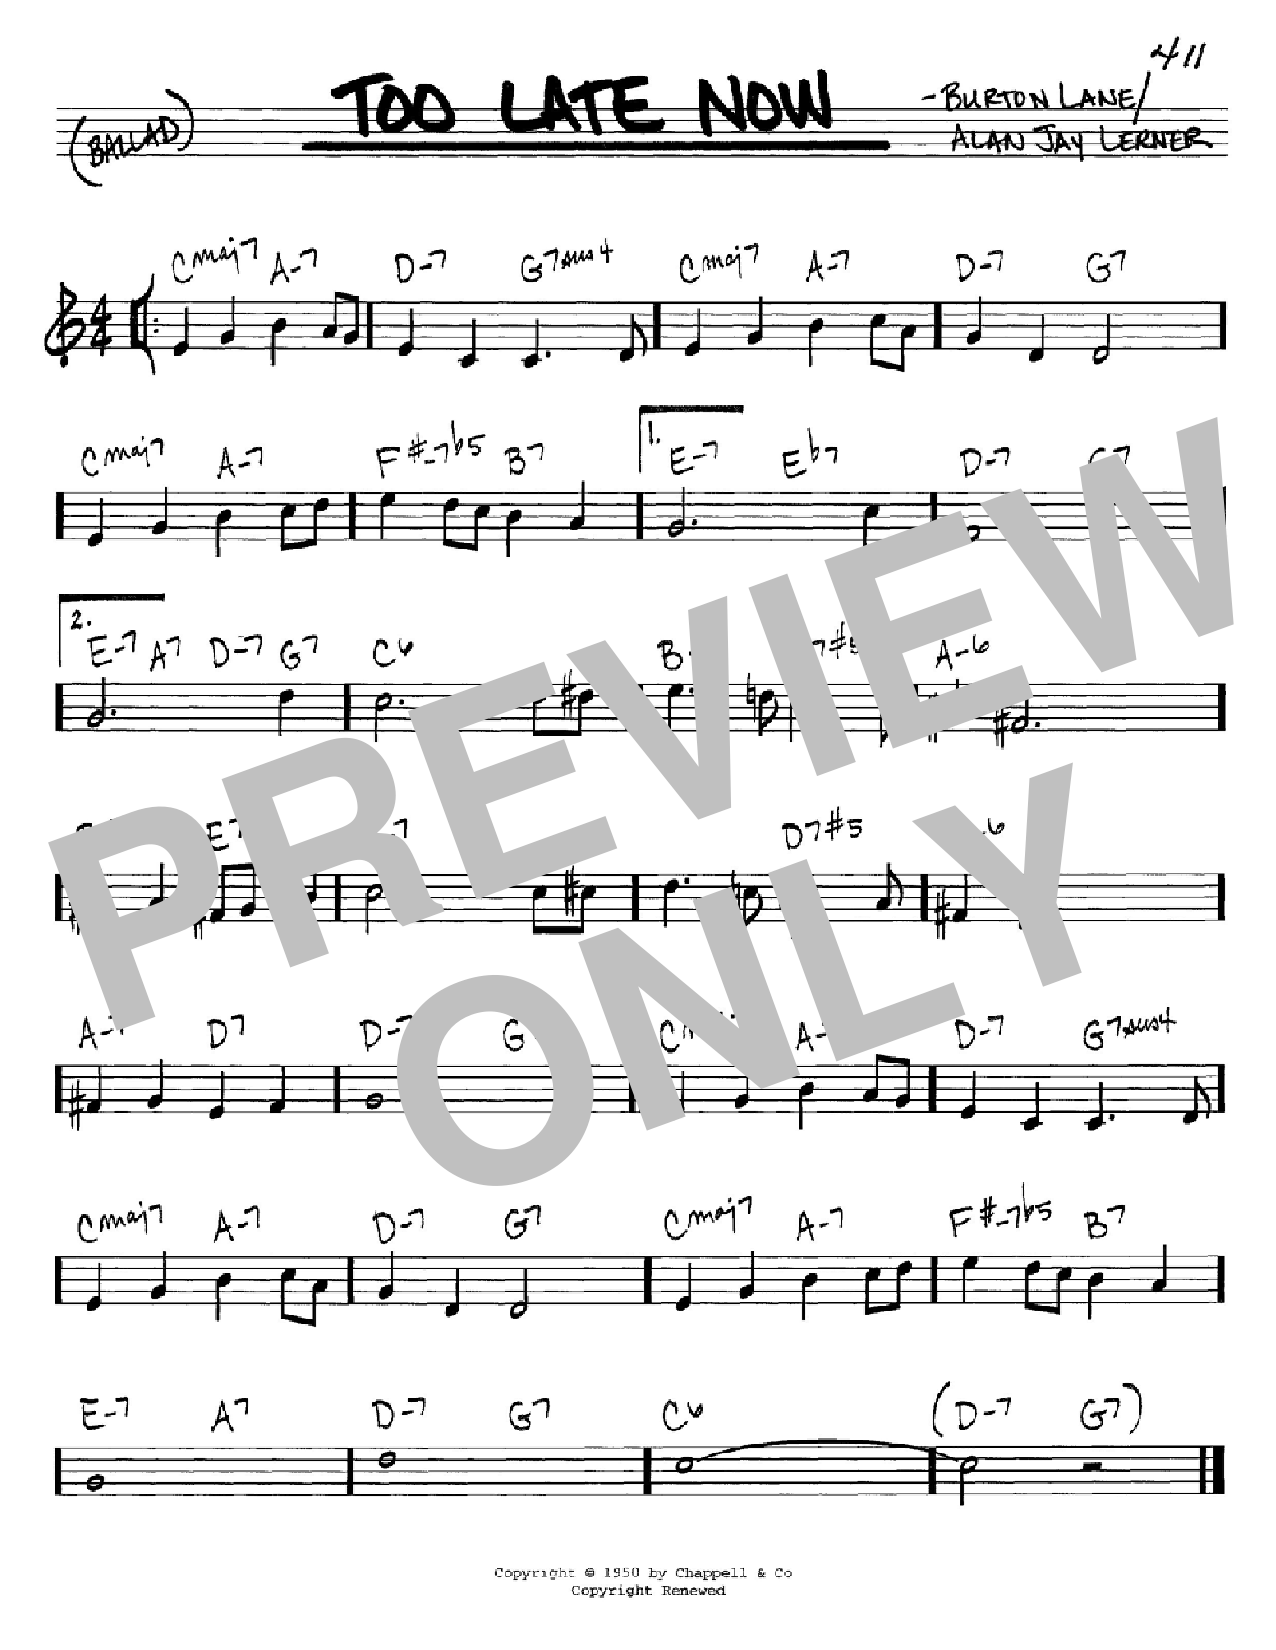 Download Alan Jay Lerner Too Late Now Sheet Music